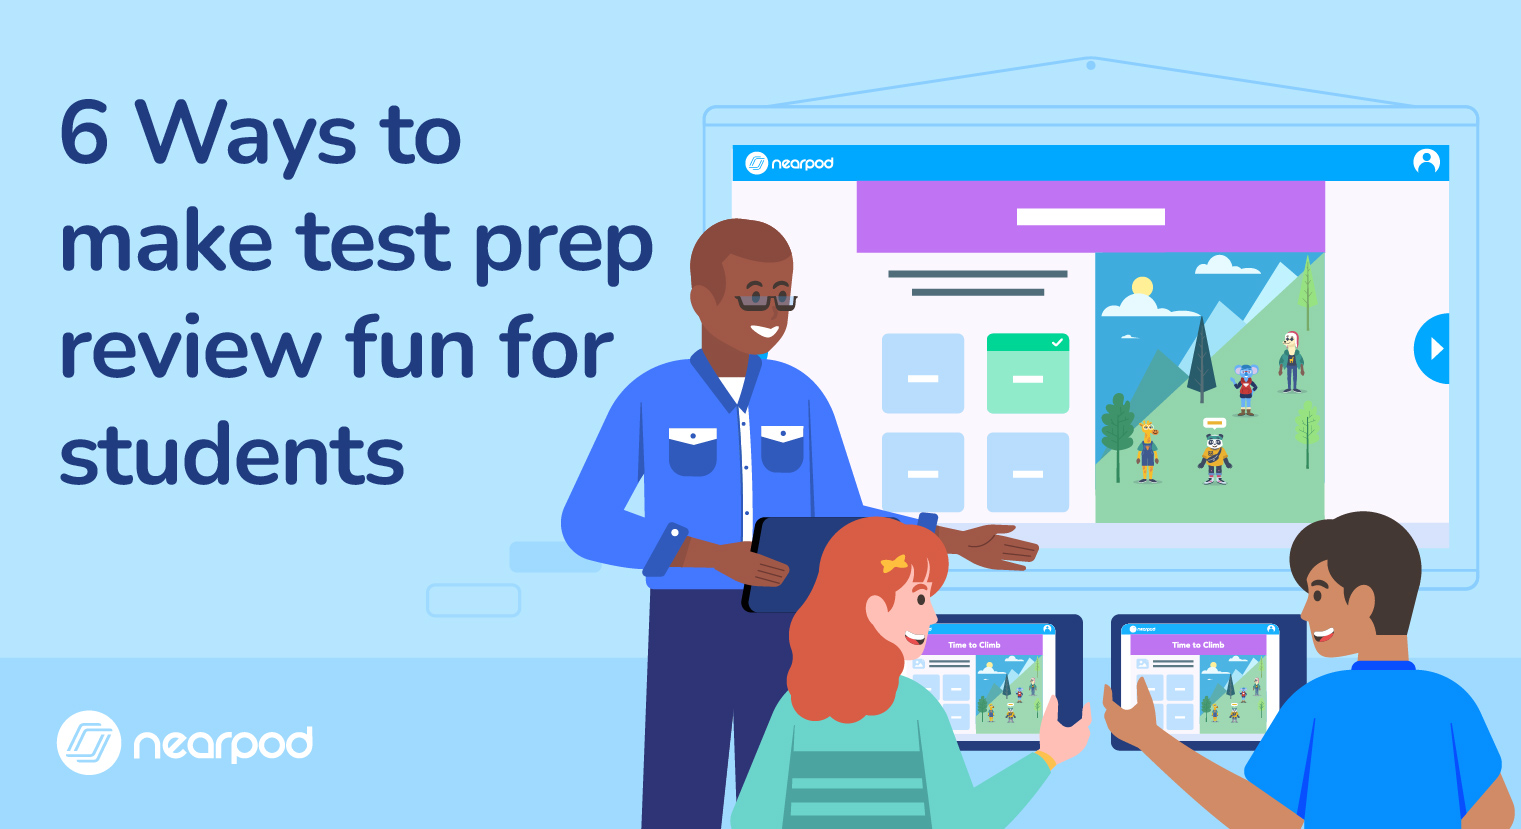 6 Ways to make test prep review fun for students